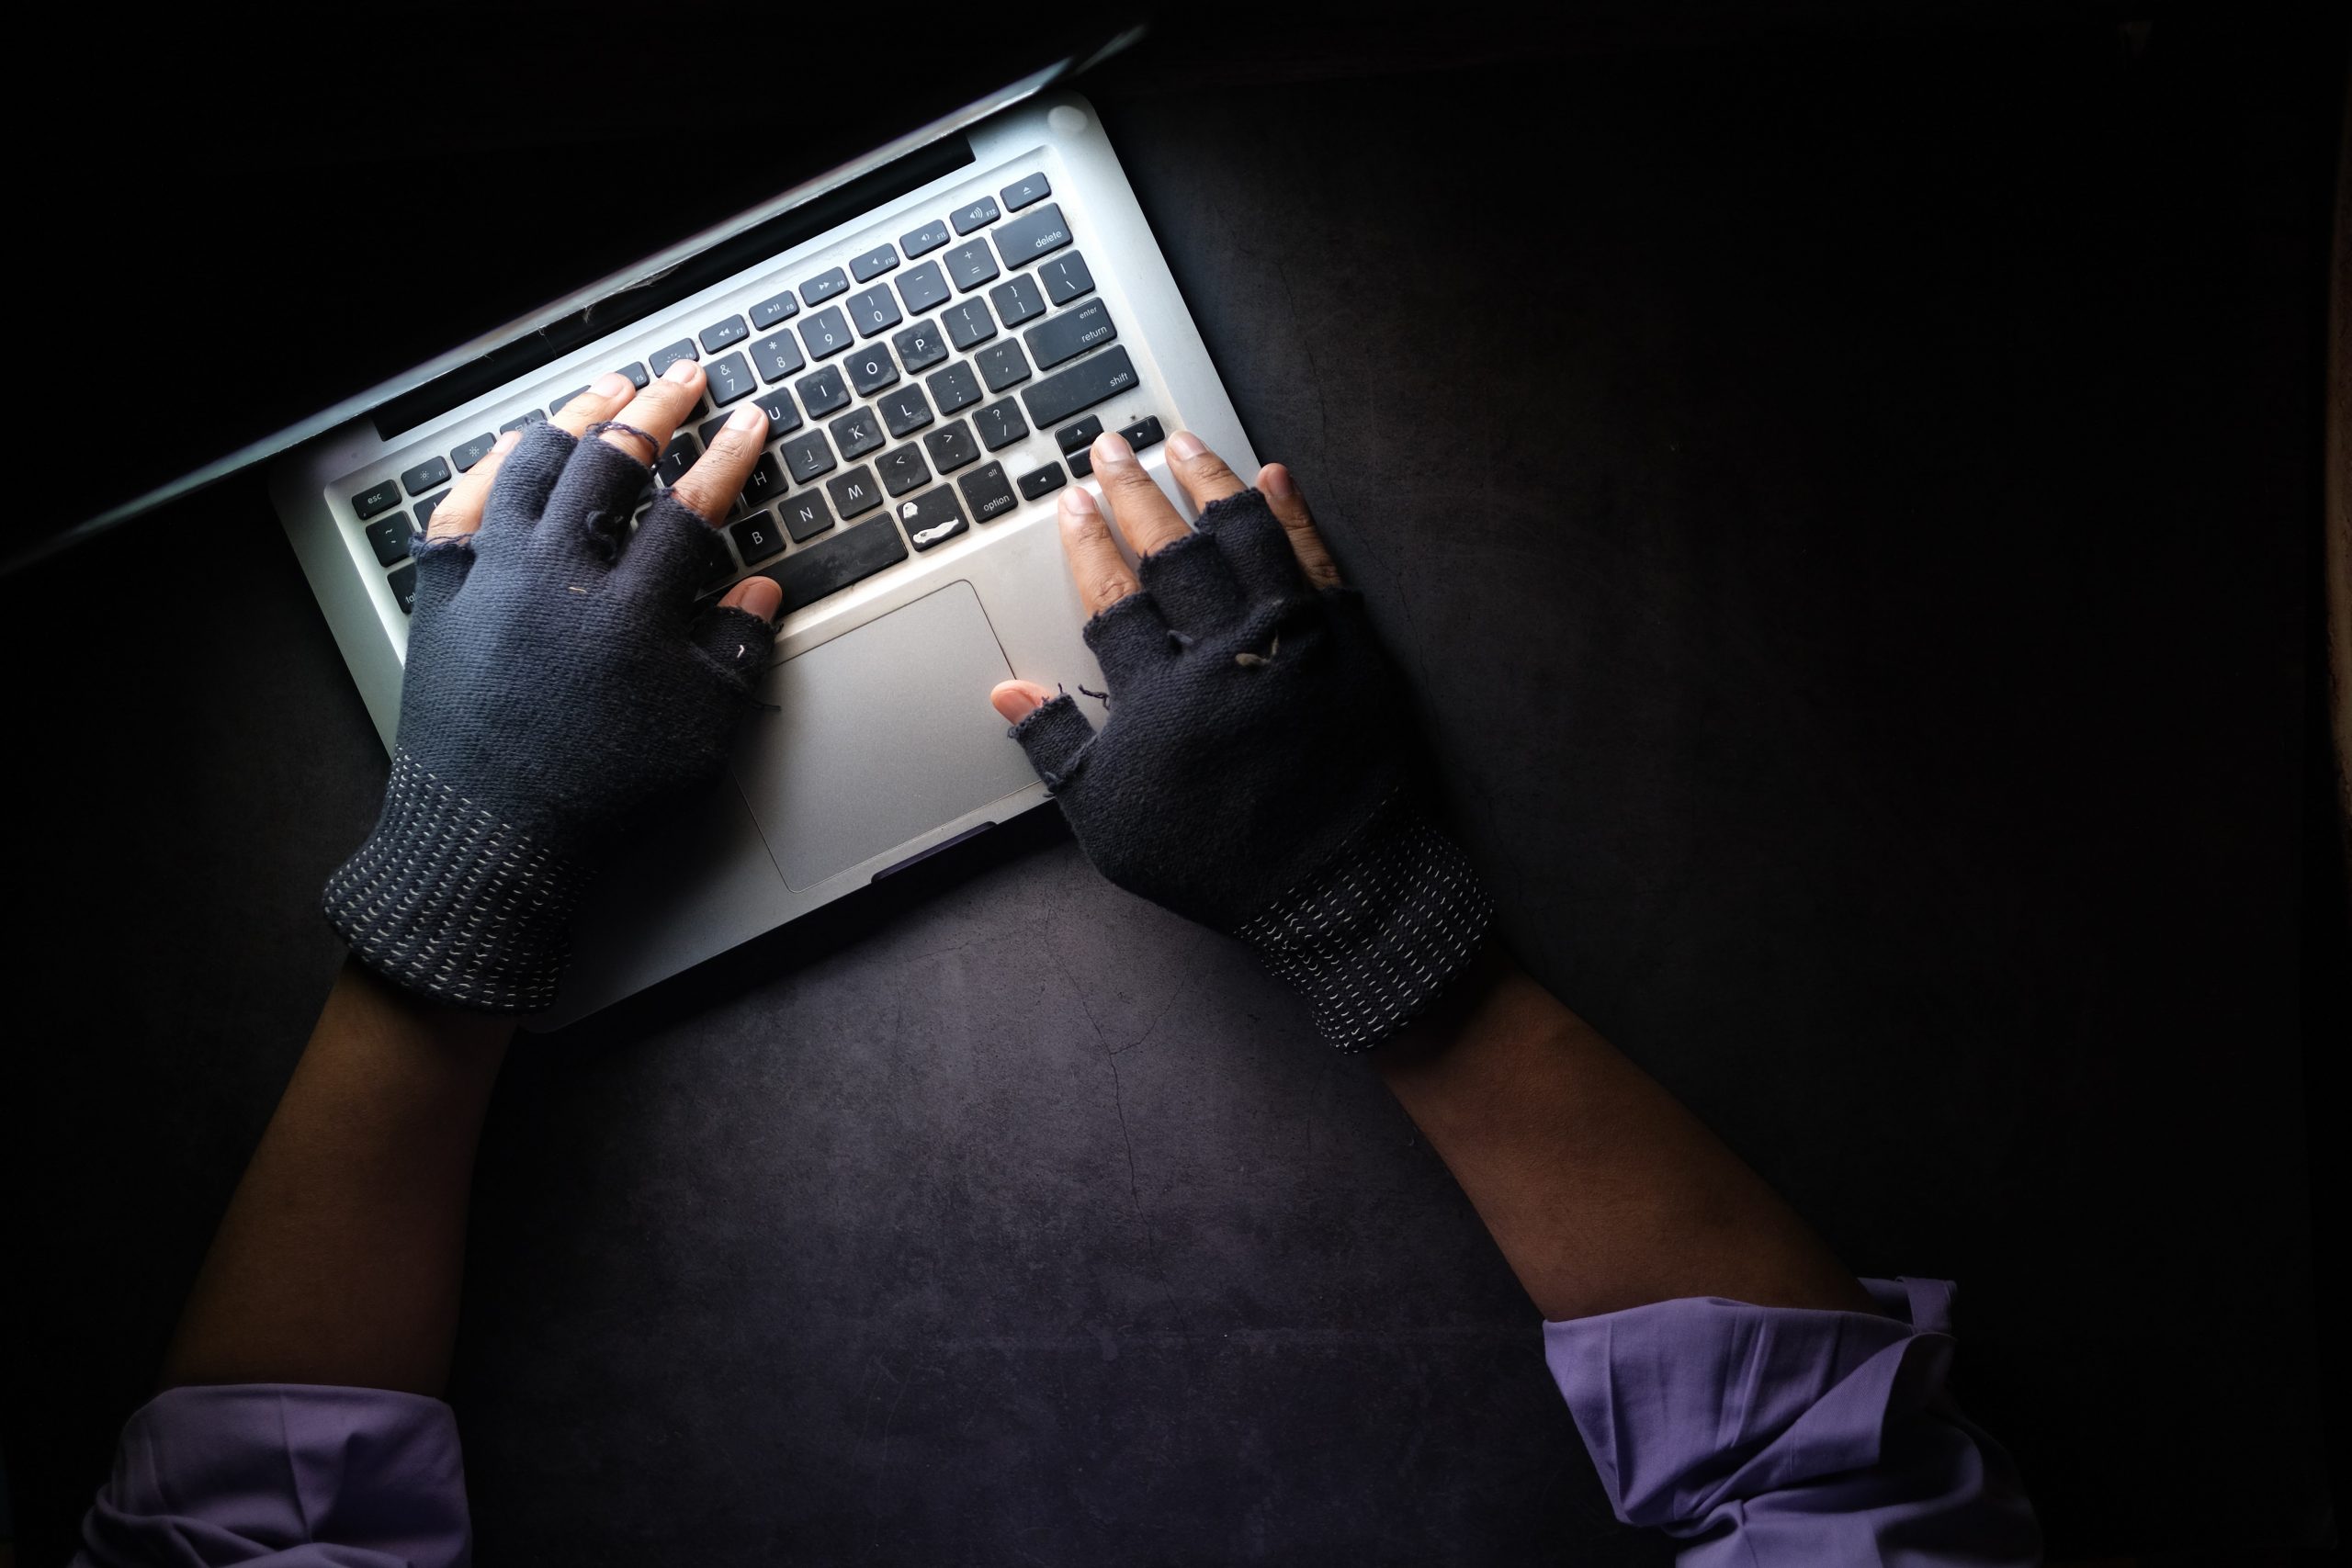 An aerial shot shows a pair of hands wearing gloves typing on a Macbook laptop. The photo is lit only by the laptop screen. 